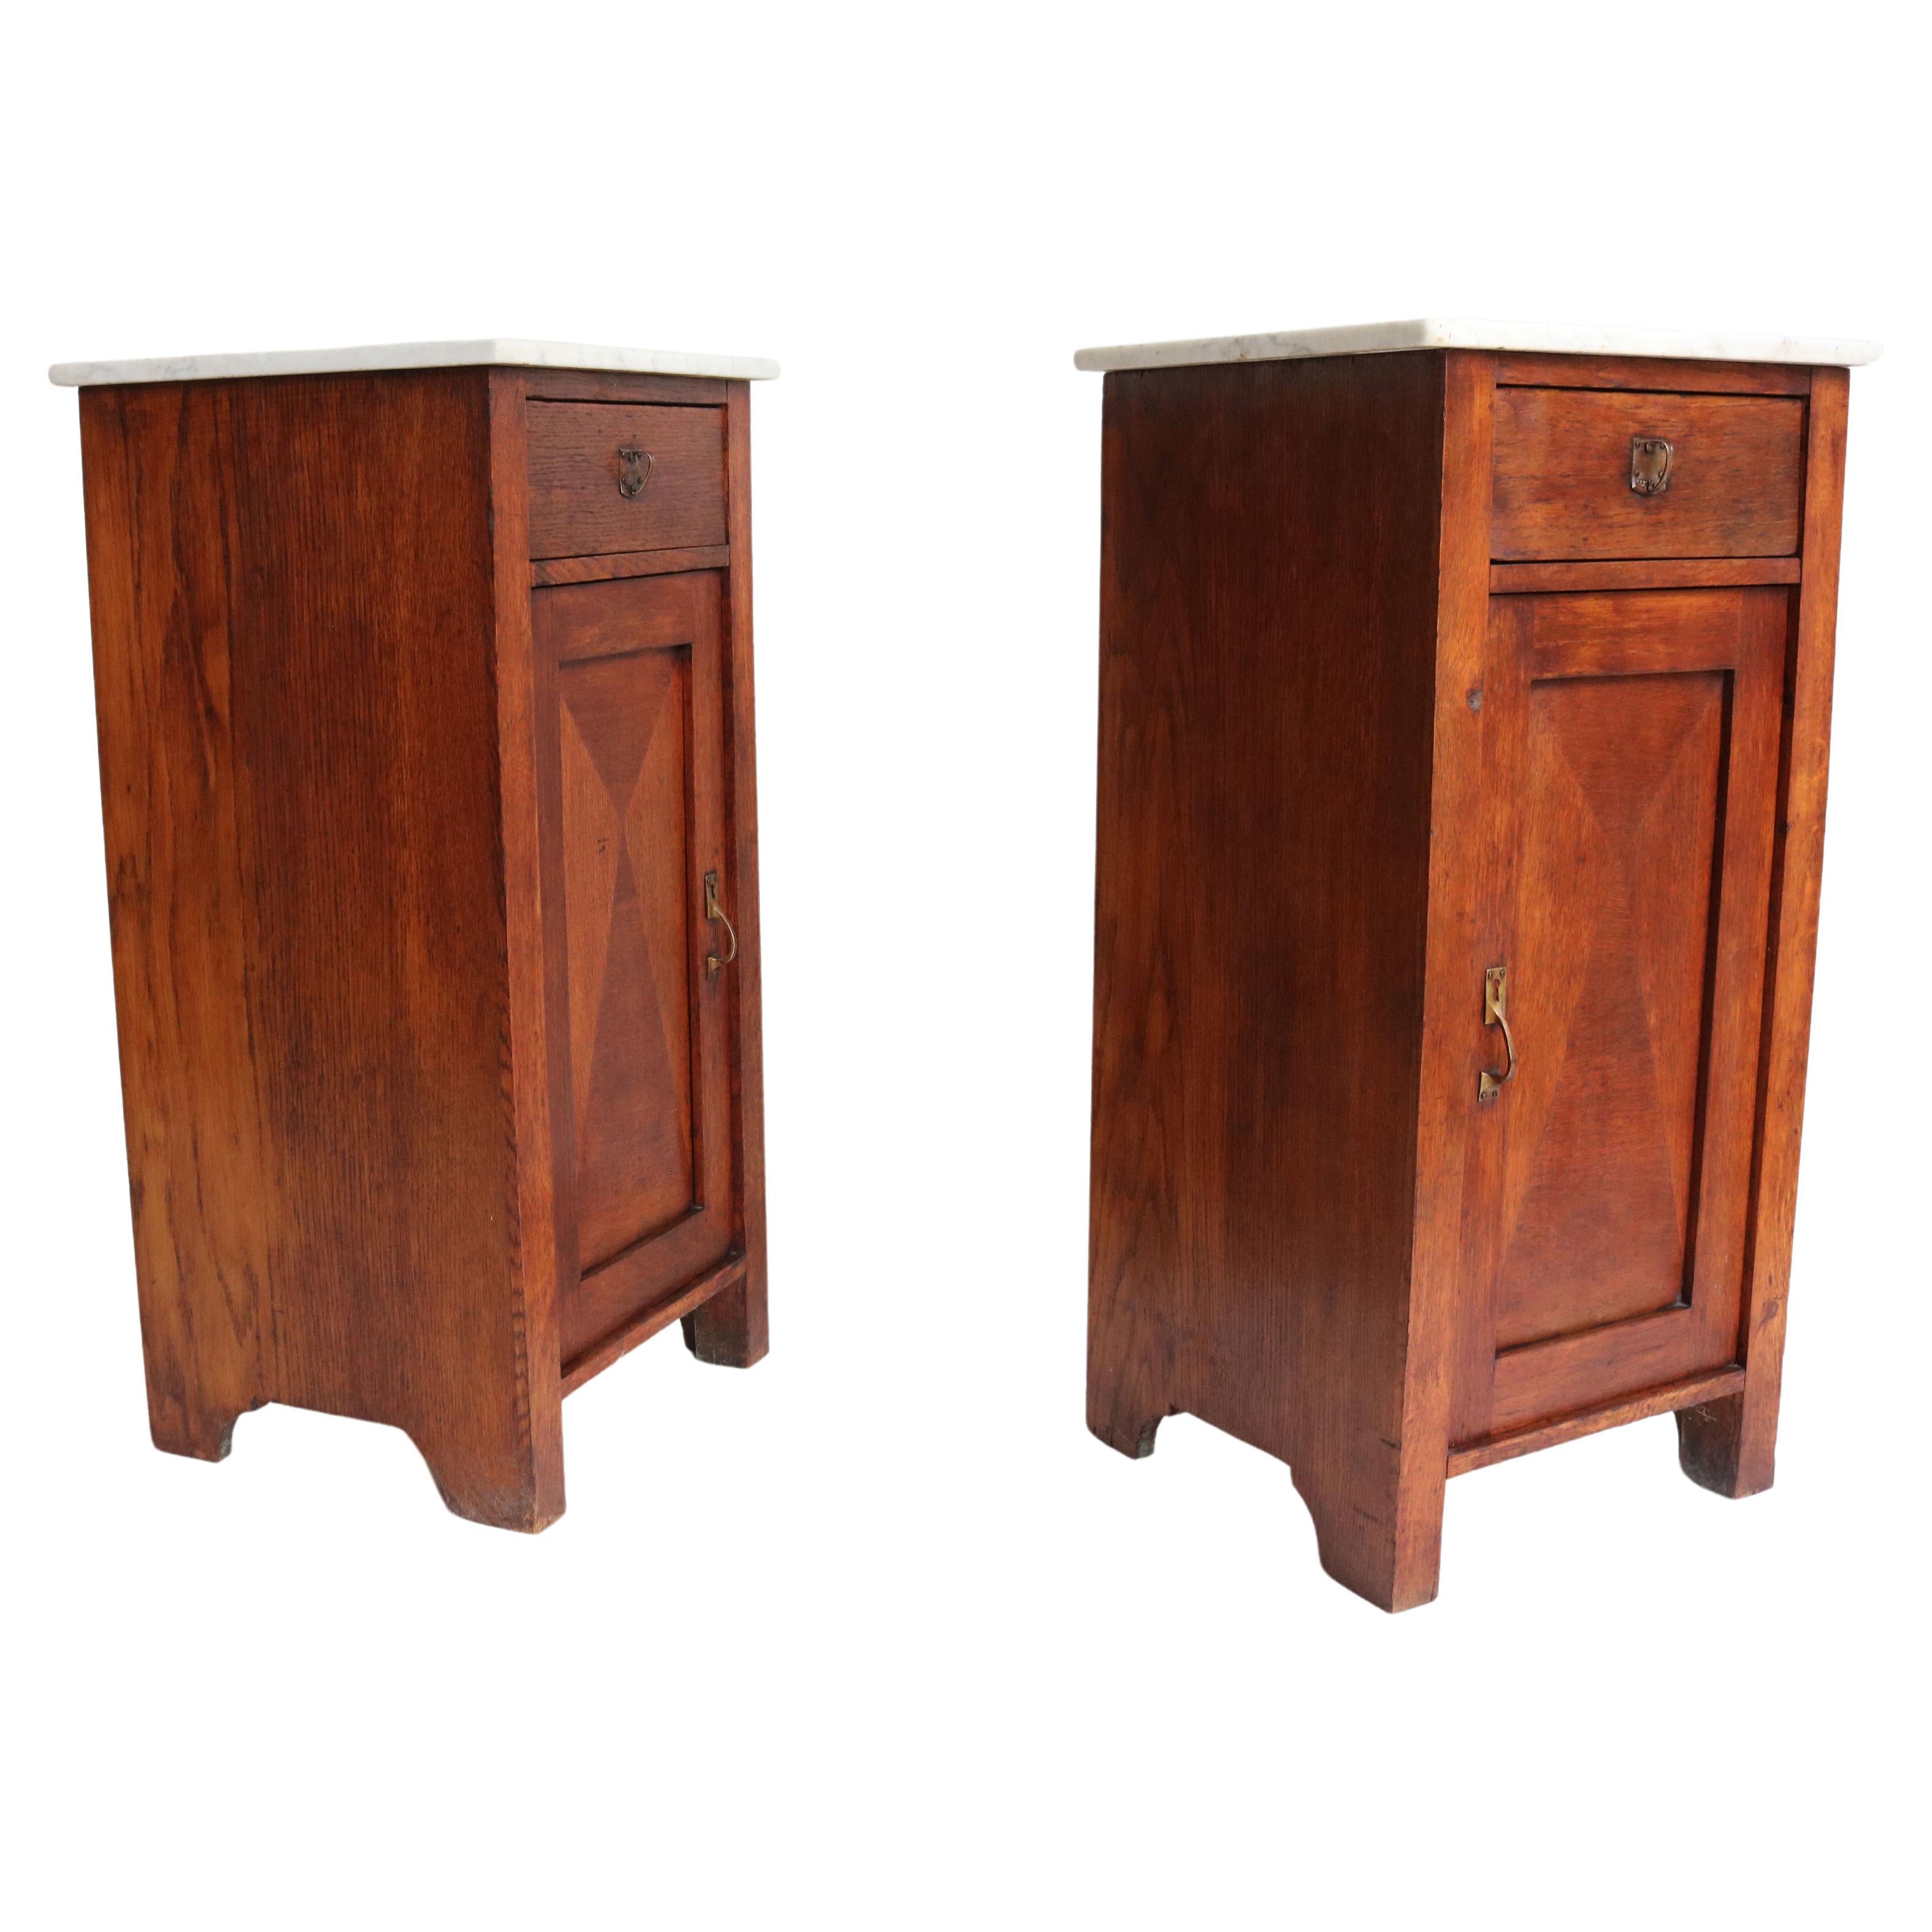 Pair of Dutch Art Deco bedside tables 1930 night stands Oak & Carrara marble   For Sale